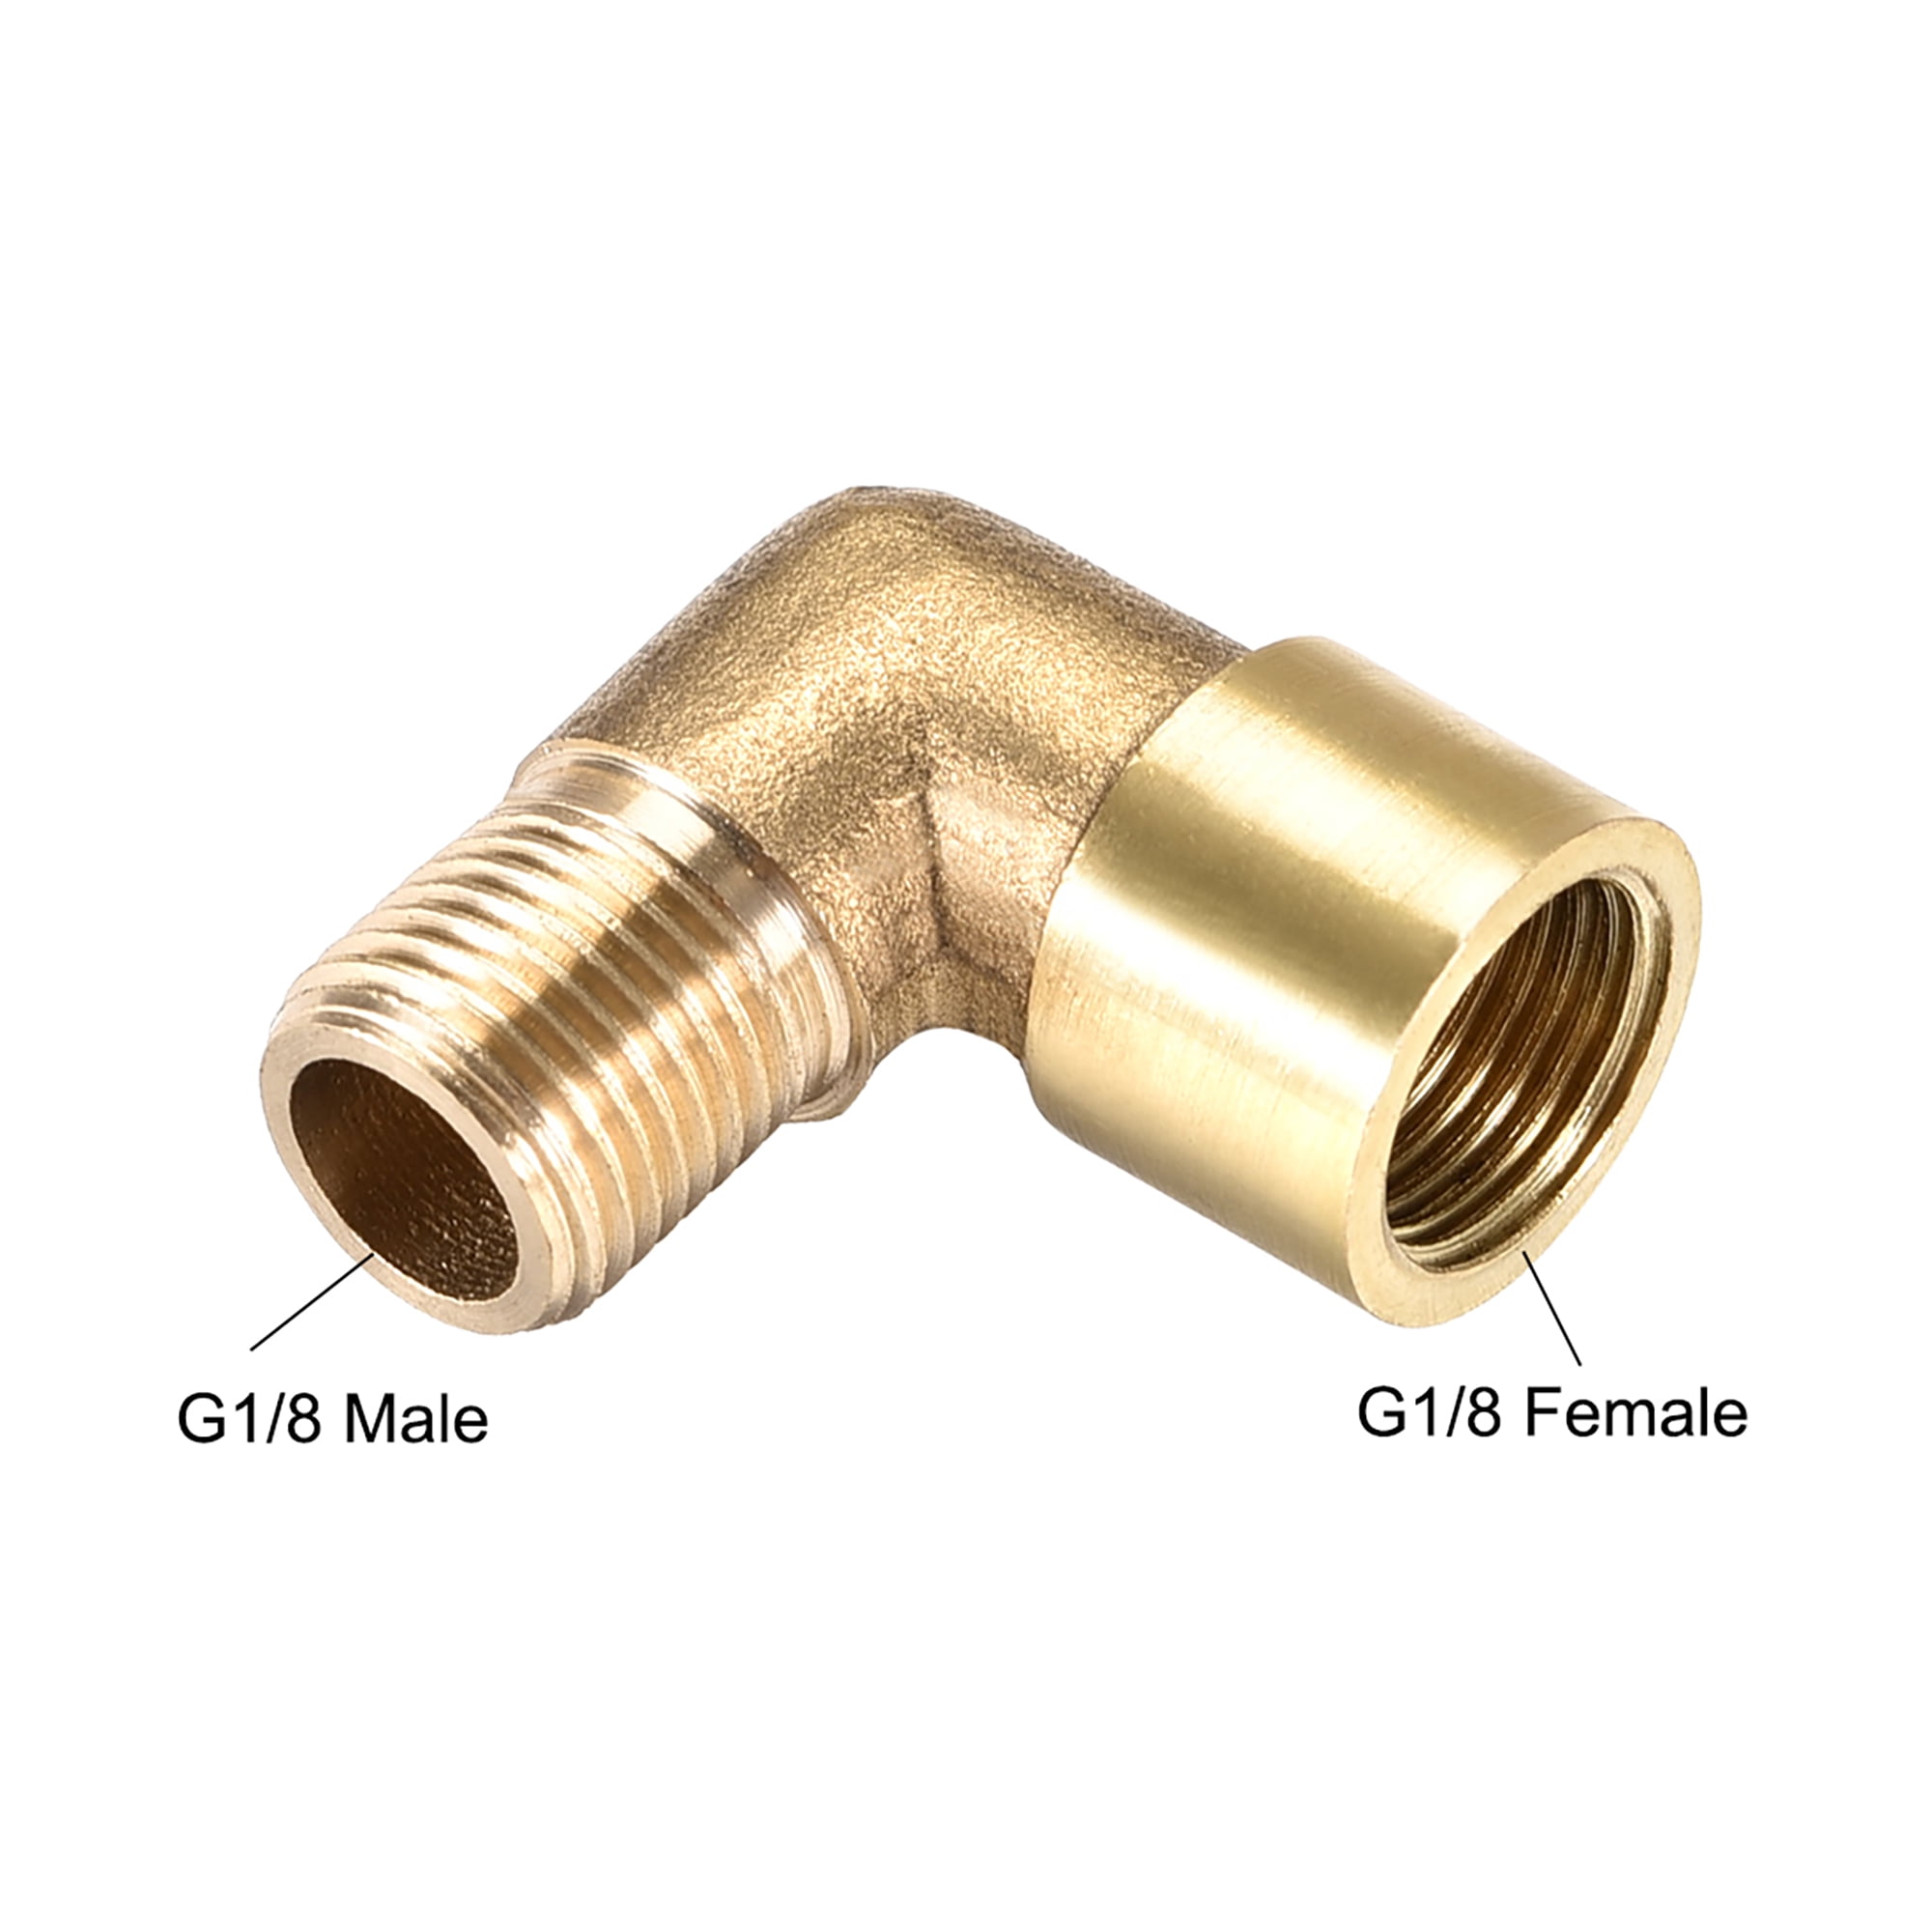 Brass Hose Fitting 90 Degree Elbow G1/8 Male x G1/8 Female Pipe Fittings 2pcs